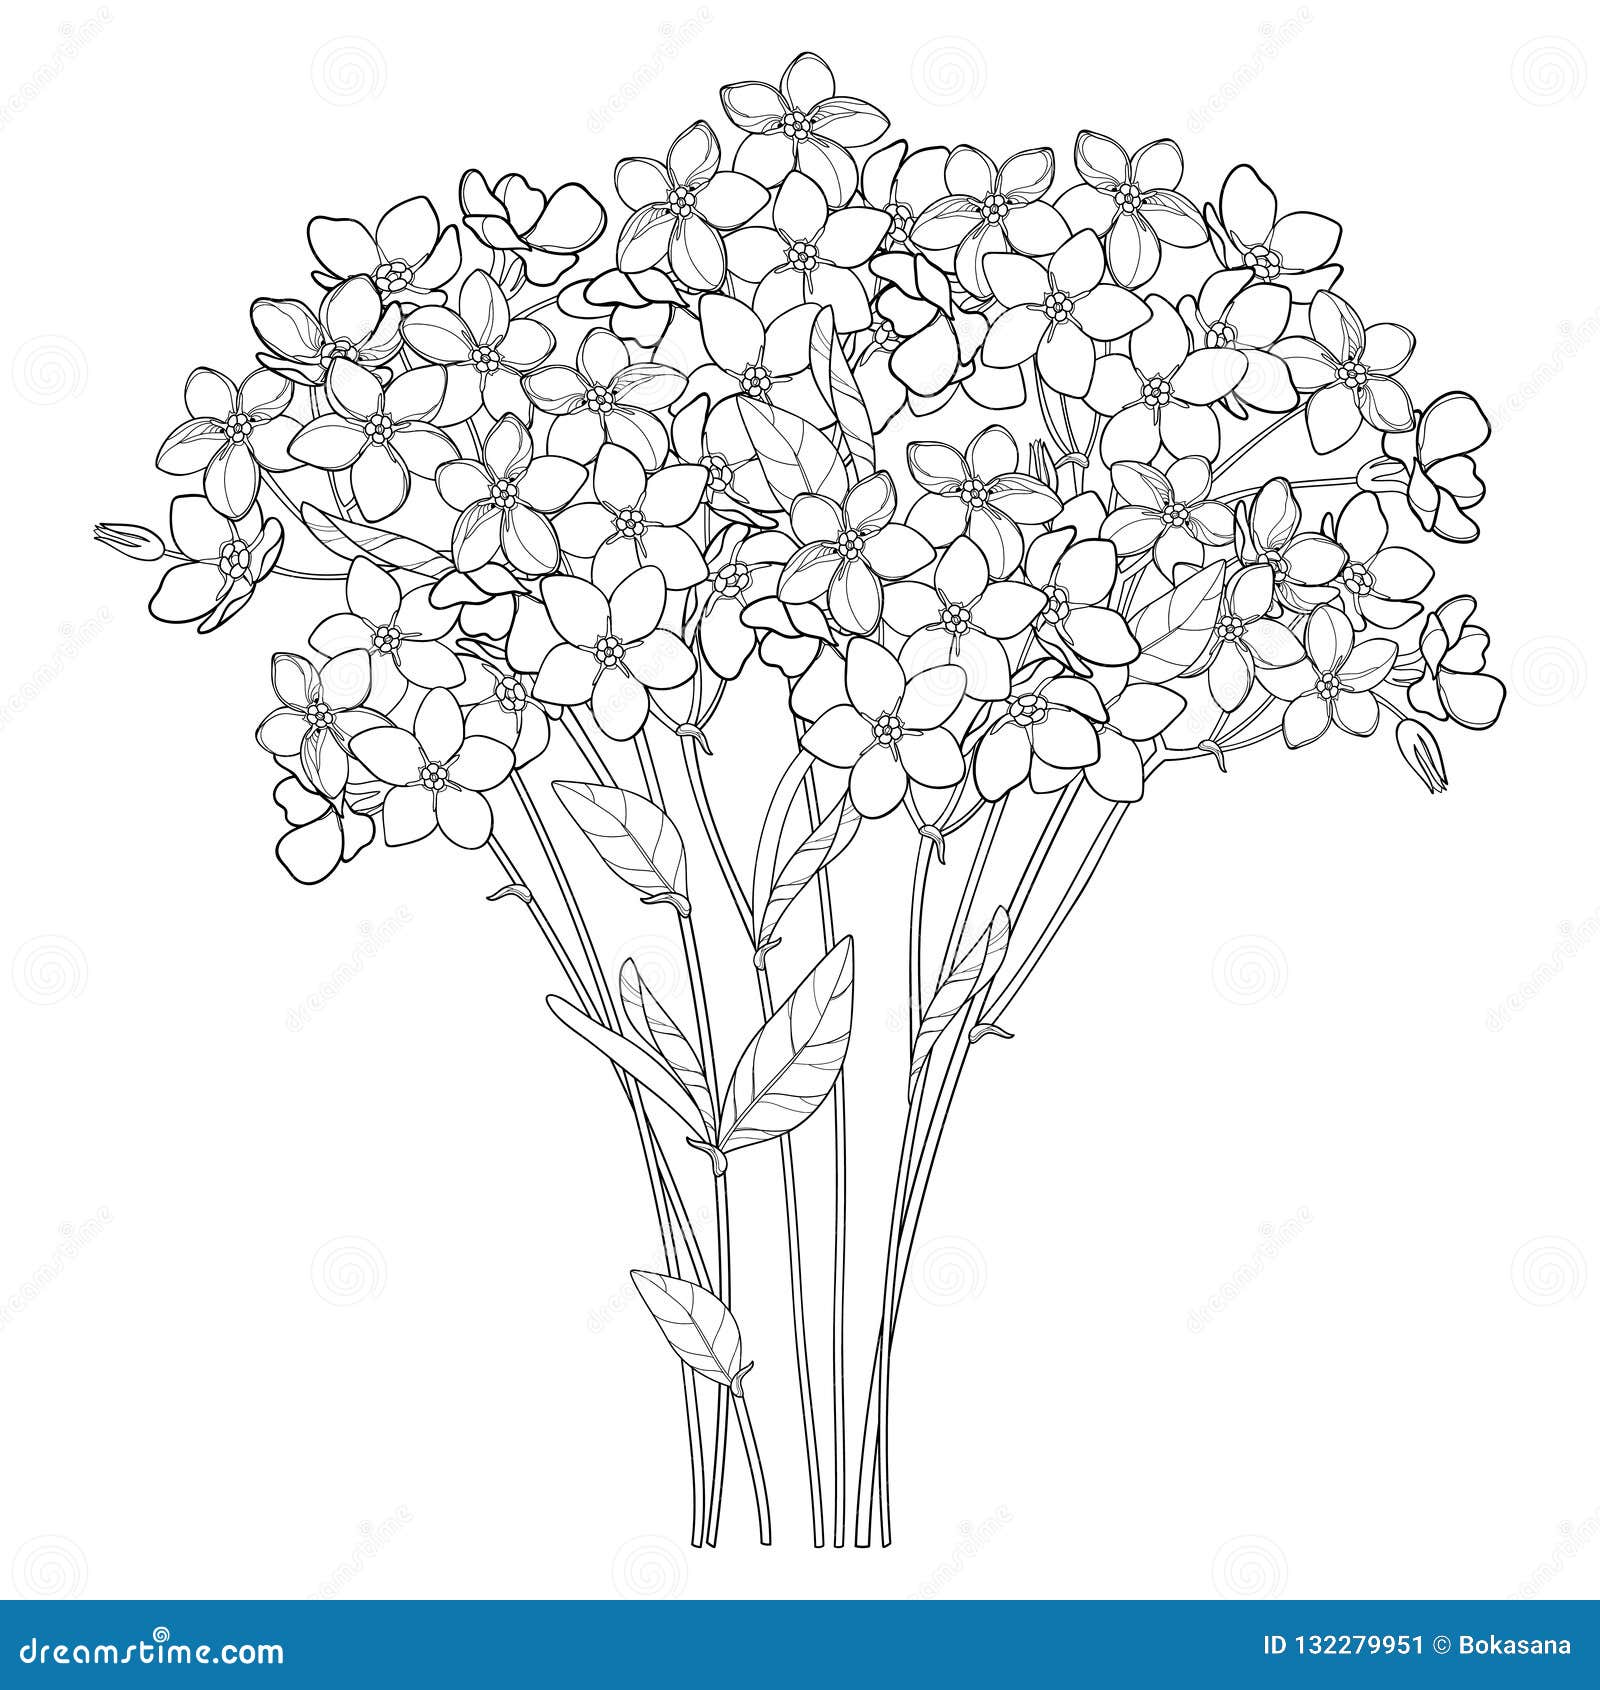  bouquet with outline forget me not or myosotis flower bunch, bud and leaf in black  on white background.